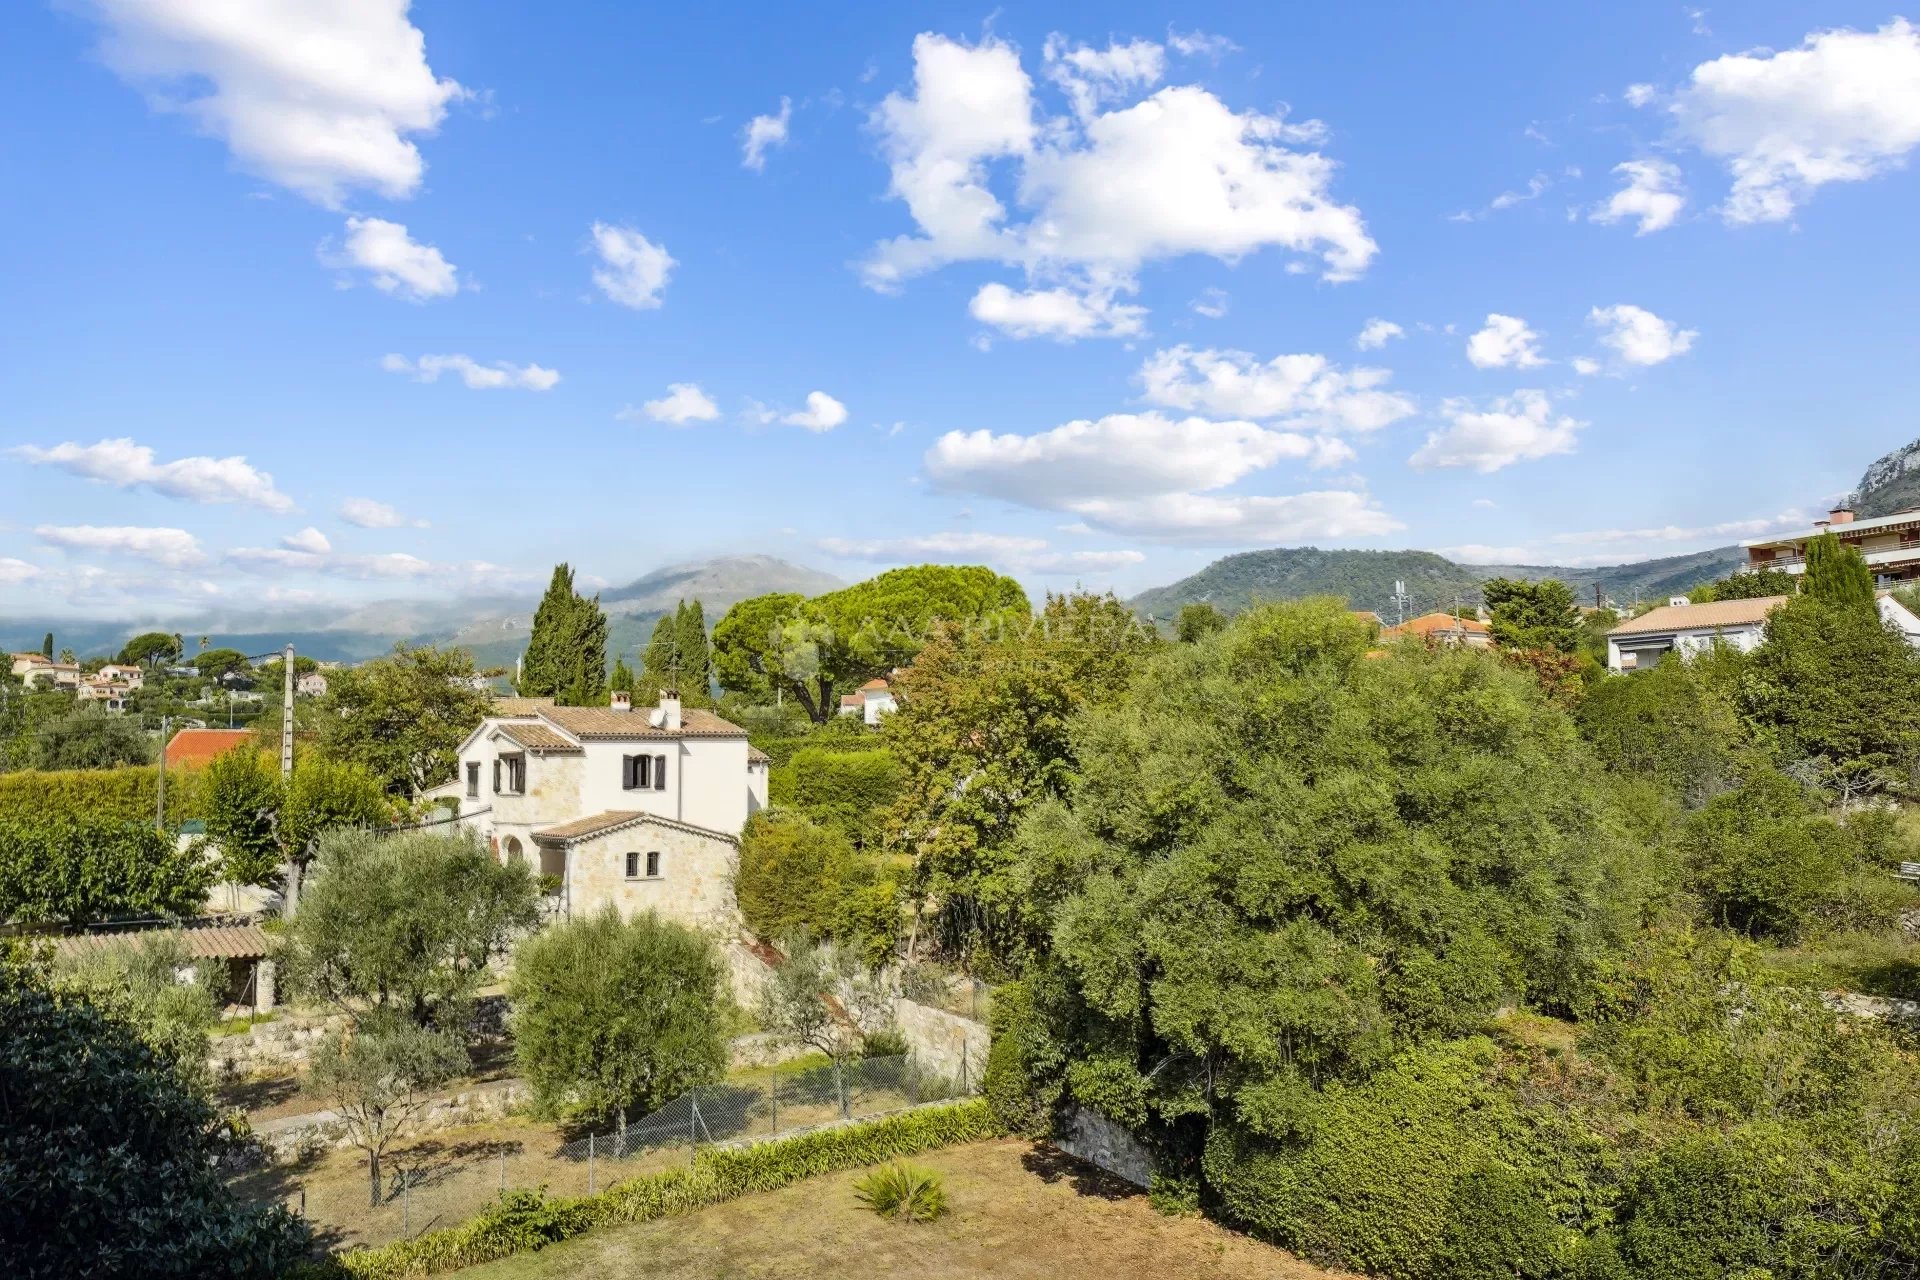 SOLD - SOLE AGENT - Vence - Top floor 3 room apartment walking distance to the old town. Terrace with view.  2 Parkings. Cellar.